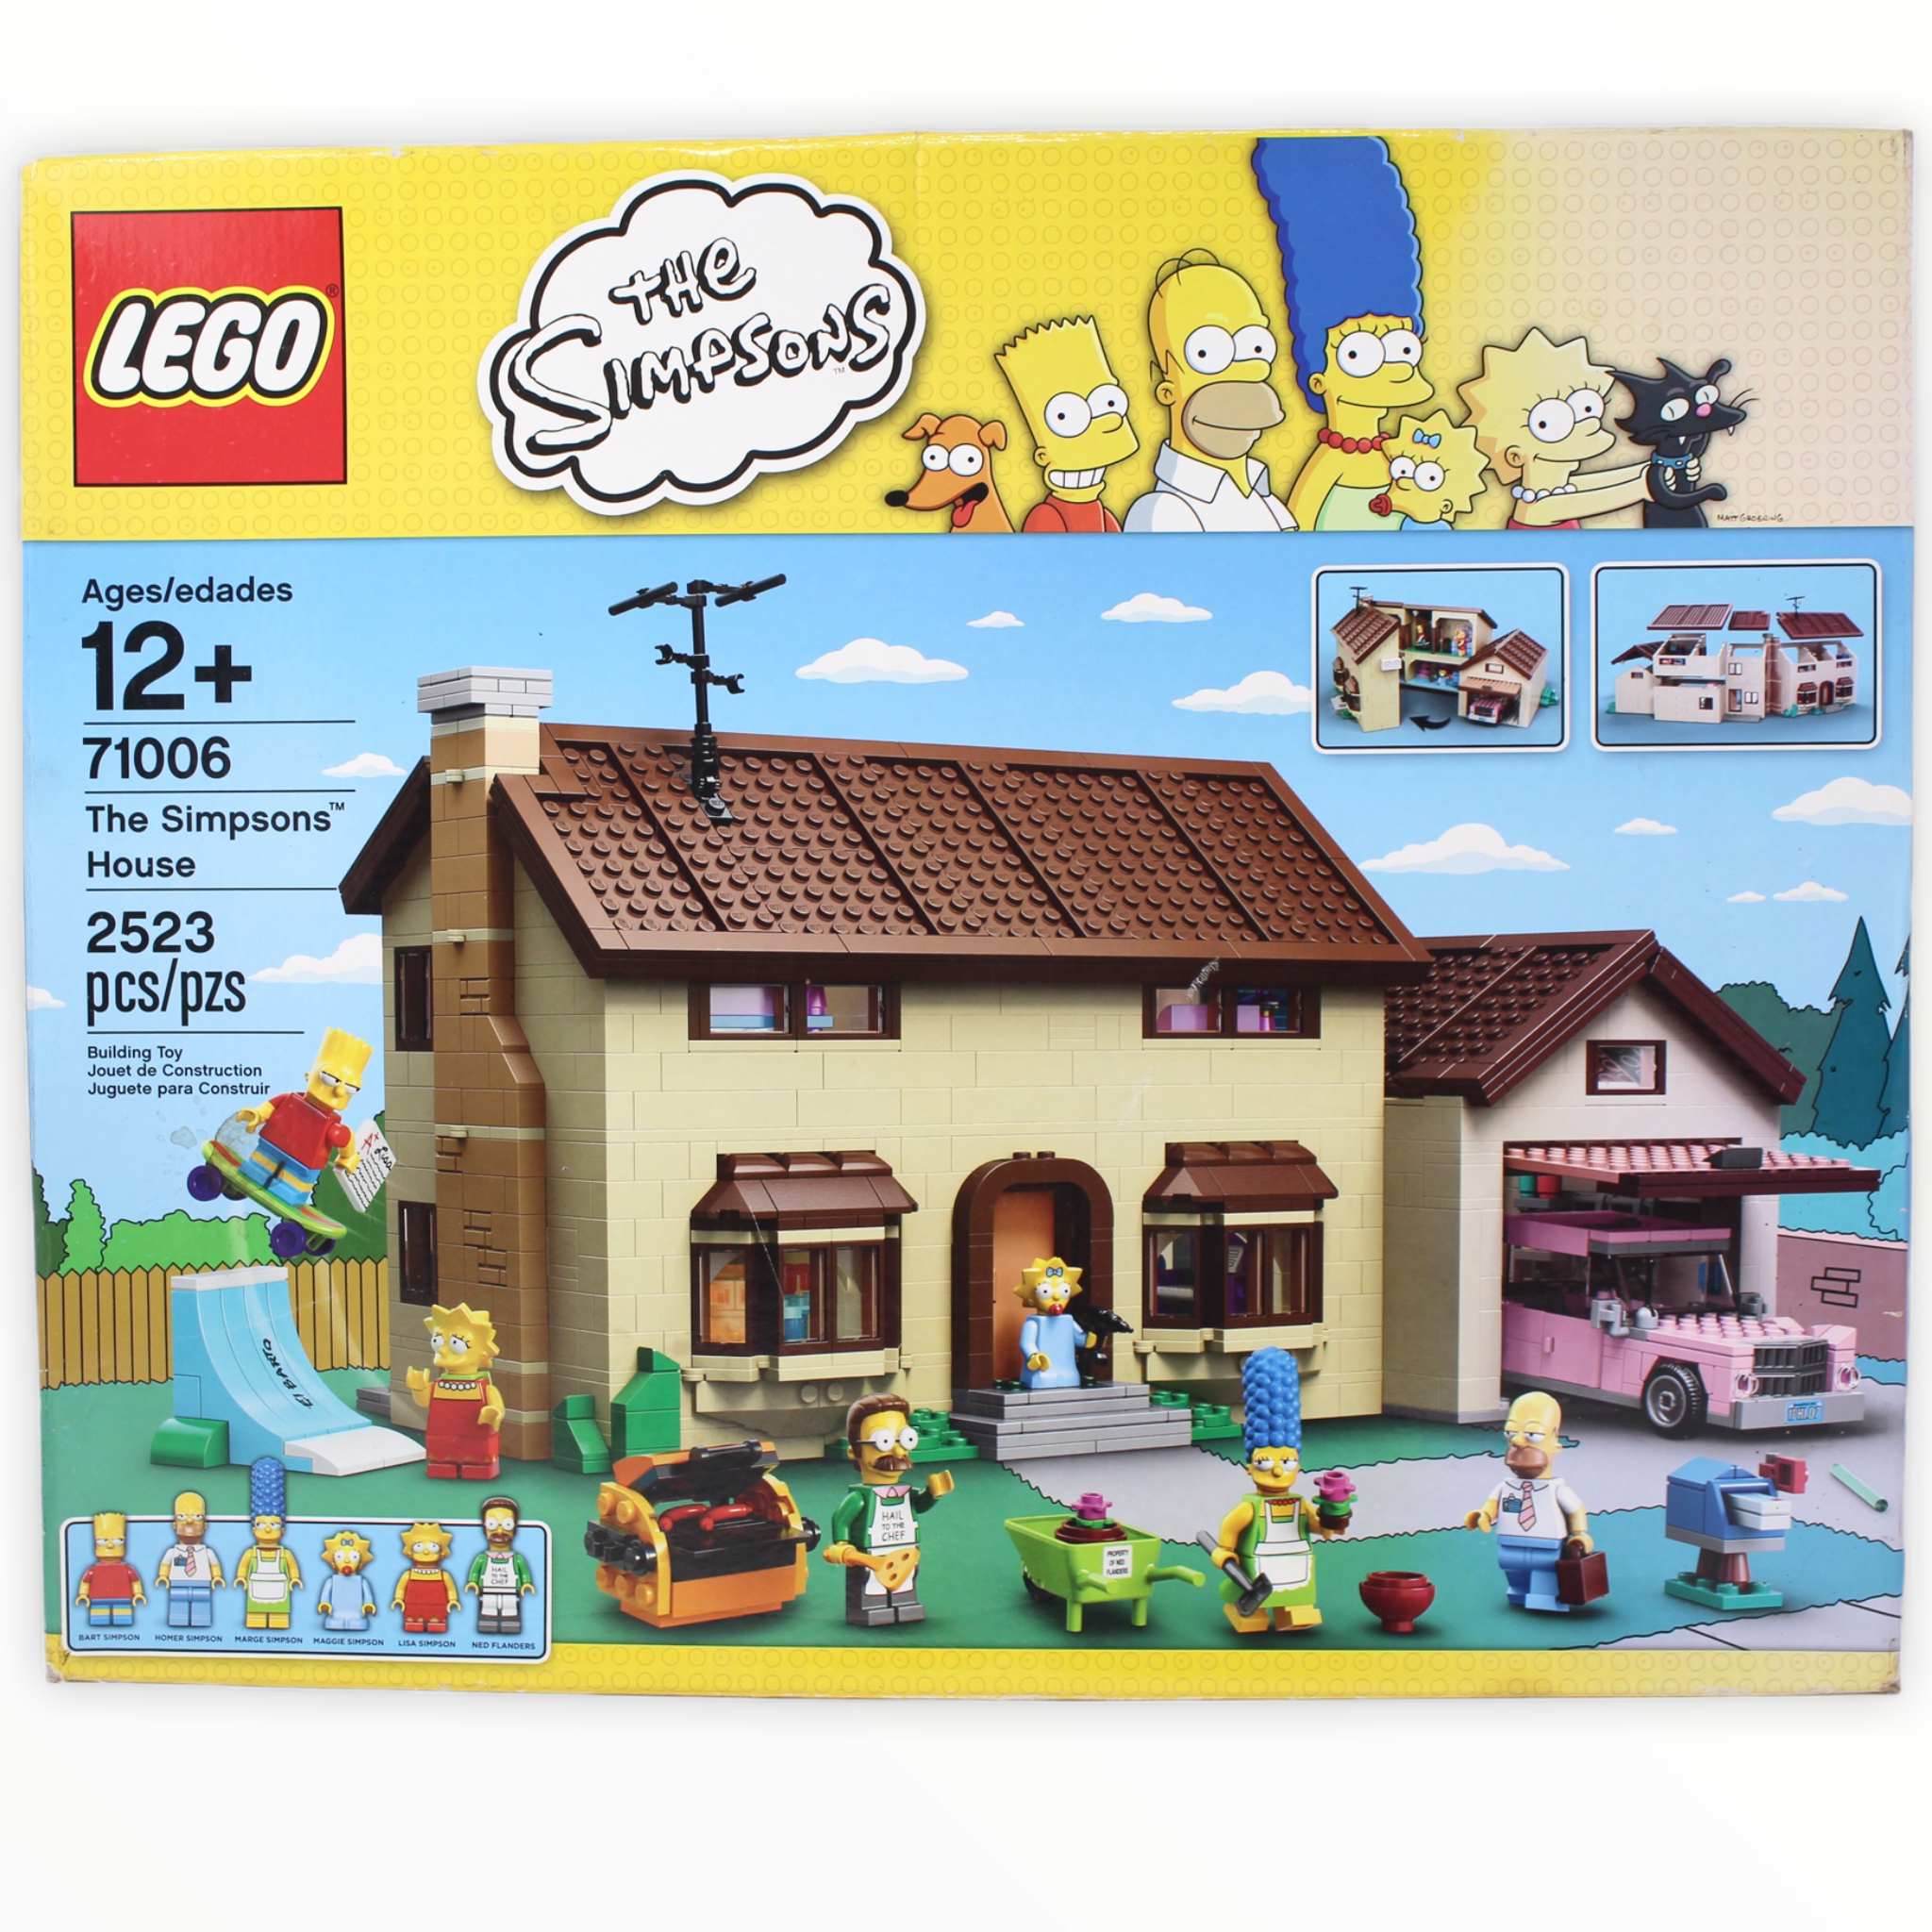 Retired Set 71006 LEGO The Simpsons House